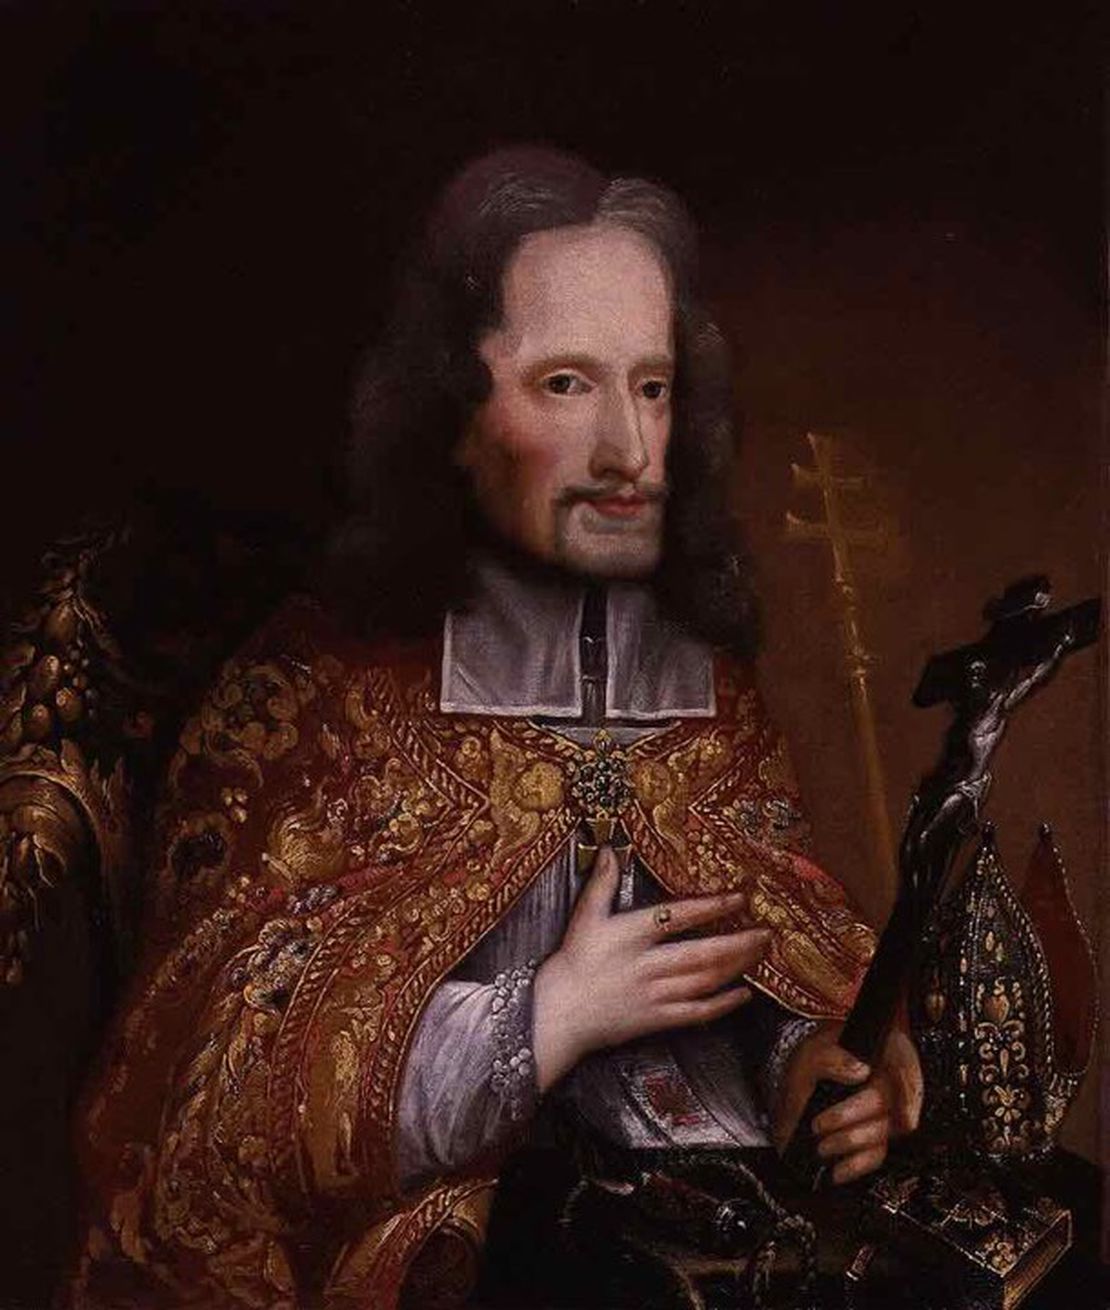 St. Oliver Plunkett becomes Archbishop of Armagh and Primate of All Ireland